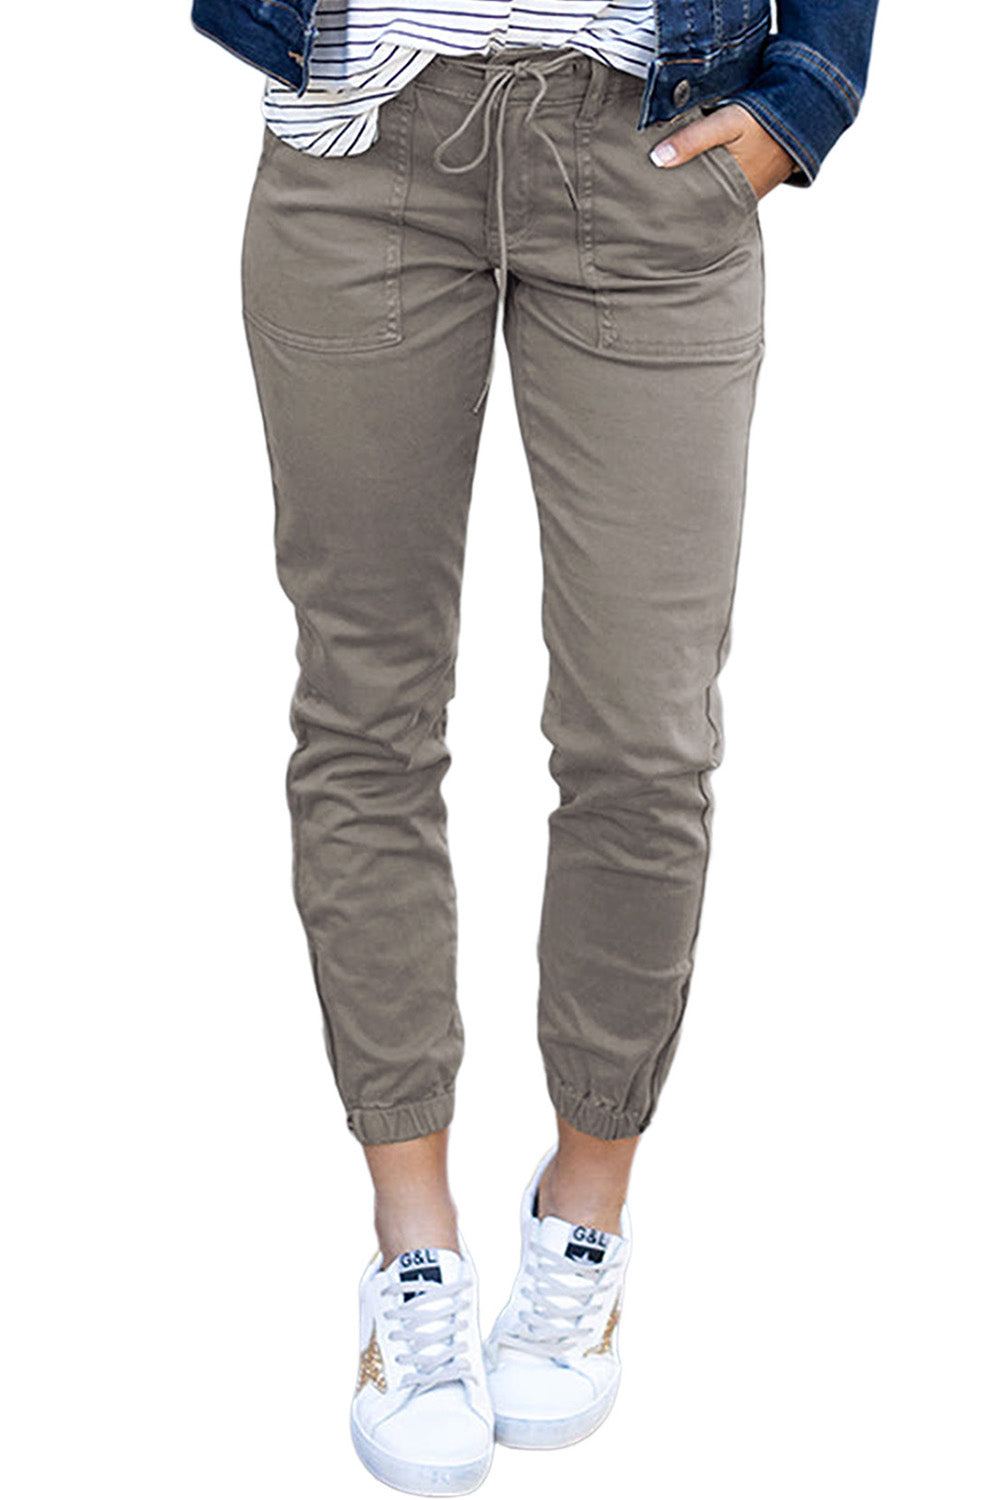 Green Slim Fit Pocketed Casual High Waisted Pants